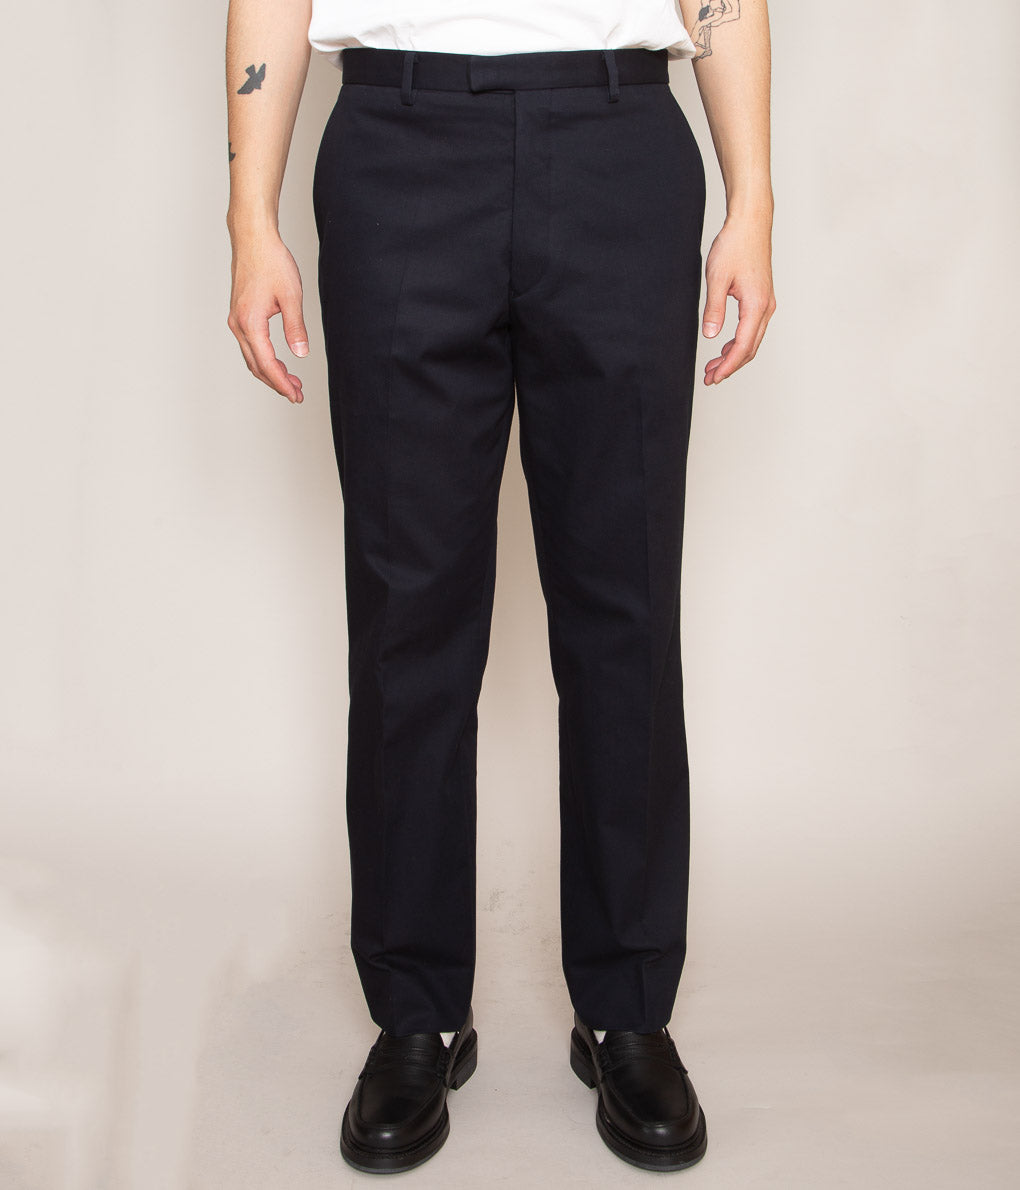 HERILL "EGYPTIAN COTTON TROUSERS"(NAVY)